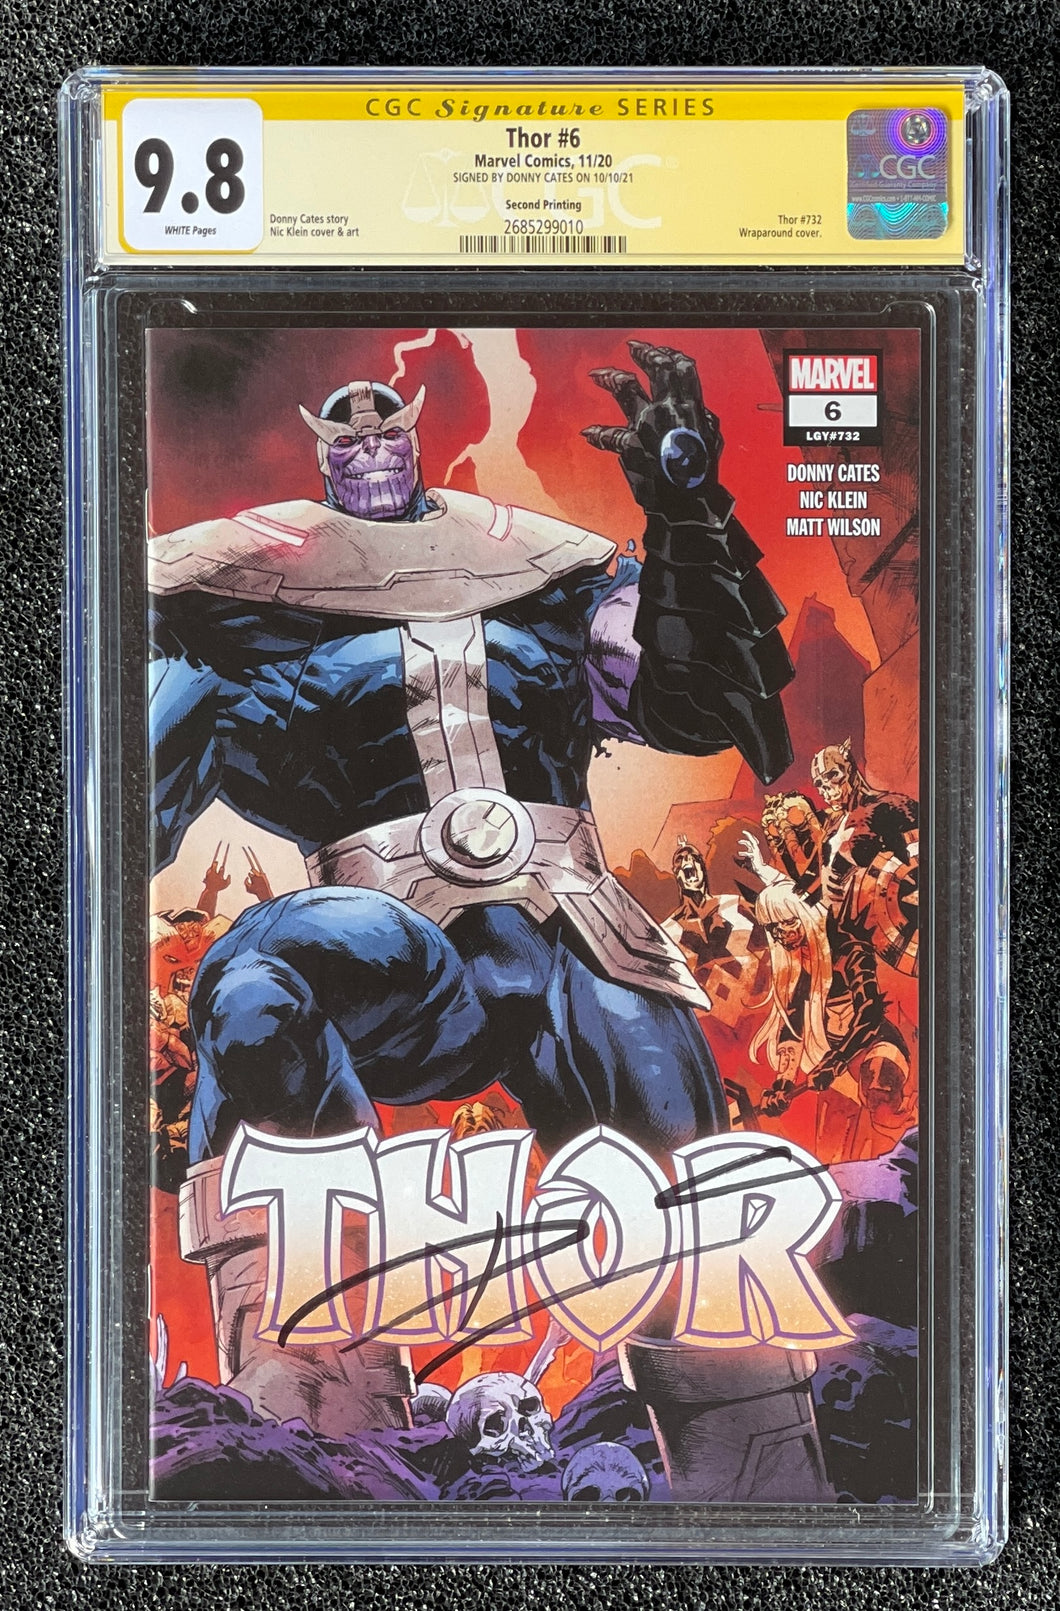 CGC 9.8 SS Thor # 6 Donny Cates Nic Klein 2nd Print Variant